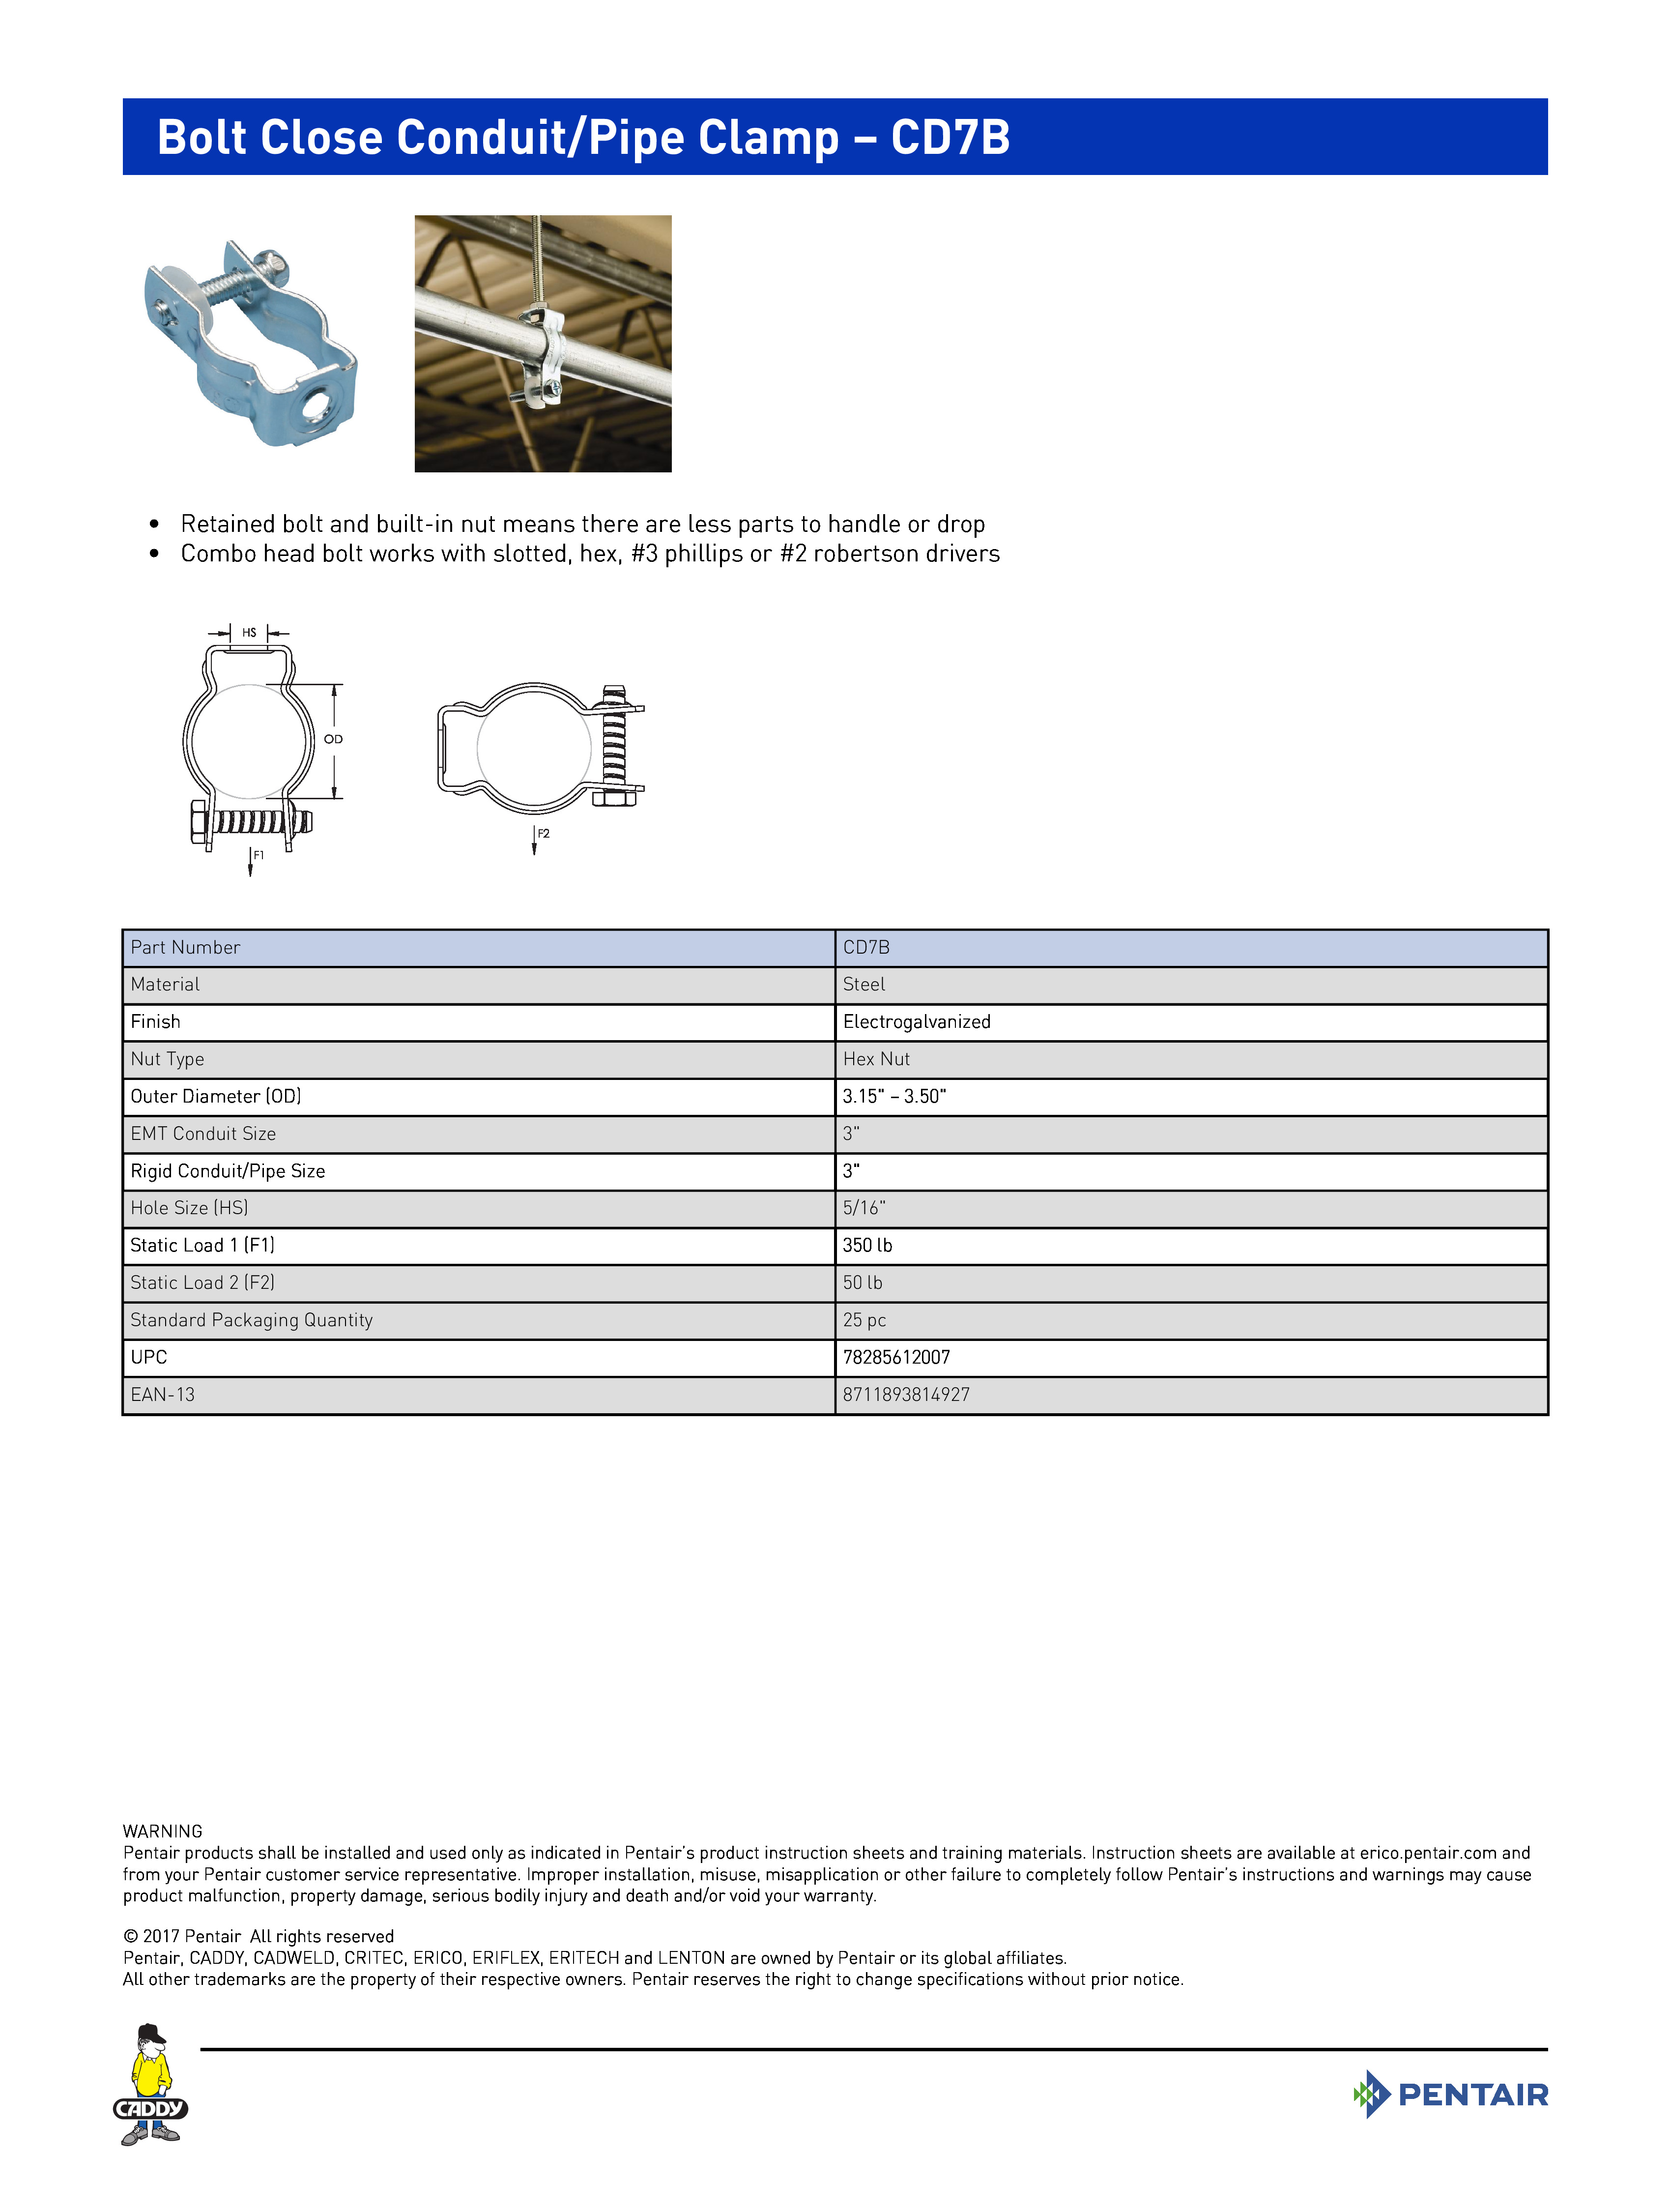 Bolt Close Conduit/Pipe Clamp – CD7B	
 	
•	Retained bolt and built-in nut means there are less parts to handle or drop	
•	Combo head bolt works with slotted, hex, #3 phillips or #2 robertson drivers	
 	
Part NumberCD7BMaterialSteelFinishElectrogalvanizedNut TypeHex NutOuter Diameter (OD)3.15" – 3.50"EMT Conduit Size3"Rigid Conduit/Pipe Size3"Hole Size (HS)5/16"Static Load 1 (F1)350 lbStatic Load 2 (F2)50 lbStandard Packaging Quantity25 pcUPC78285612007EAN-138711893814927
WARNINGPentair products shall be installed and used only as indicated in Pentair’s product instruction sheets and training materials. Instruction sheets are available at erico.pentair.com andfrom your Pentair customer service representative. Improper installation, misuse, misapplication or other failure to completely follow Pentair’s instructions and warnings may causeproduct malfunction, property damage, serious bodily injury and death and/or void your warranty. 